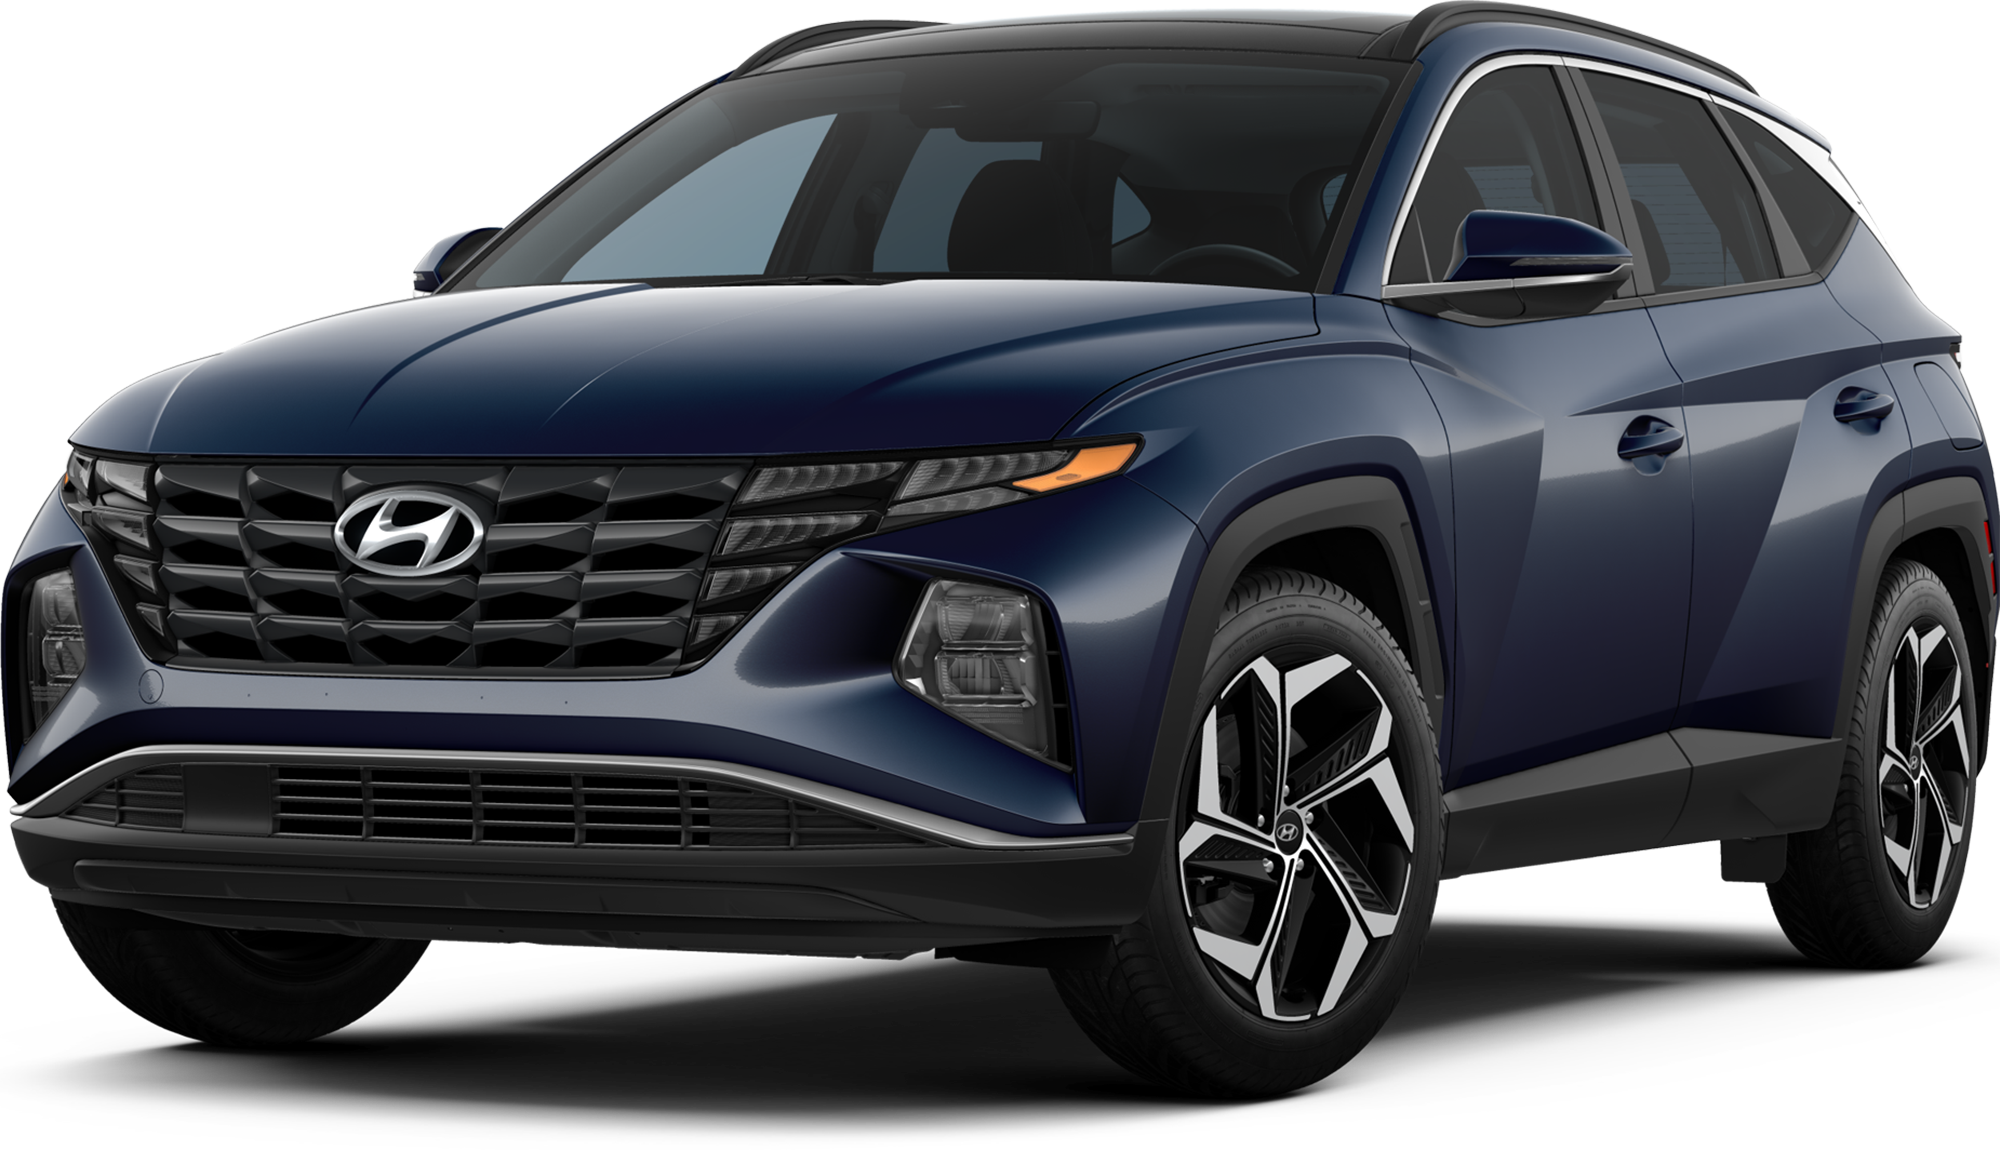 hyundai tucson accessories running boards, hyundai tucson accessories  running boards Suppliers and Manufacturers at